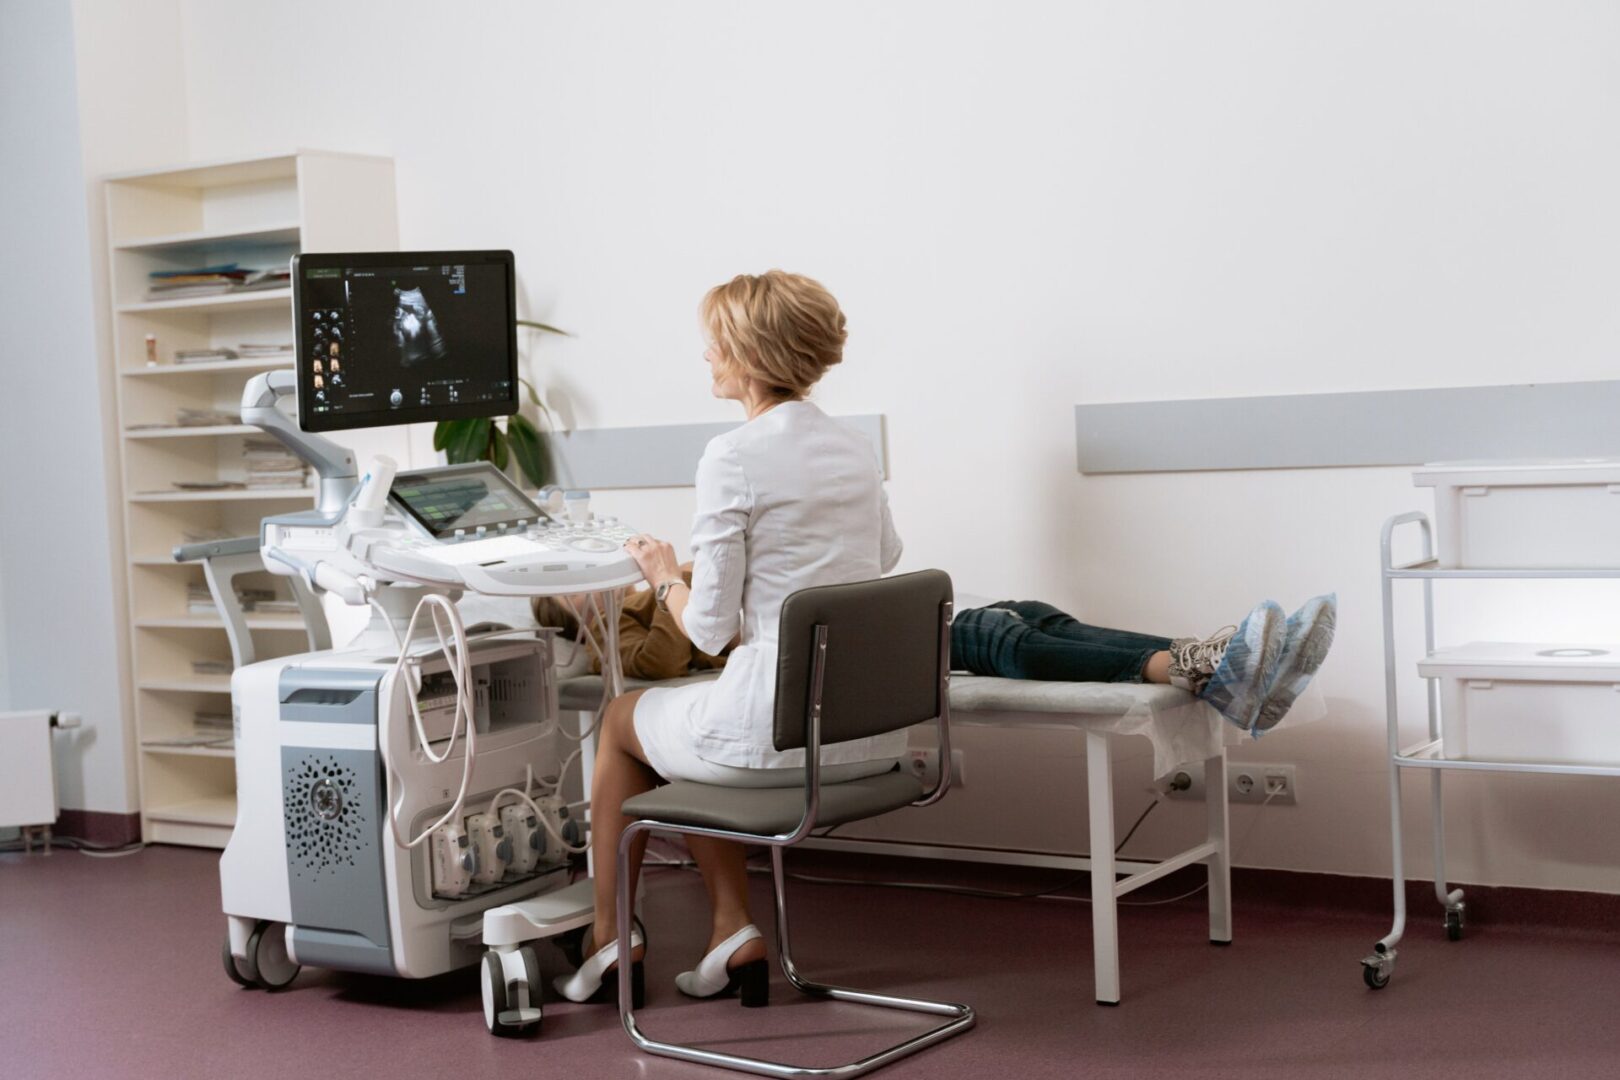 A woman sitting at her desk in front of an ultrasound machine.